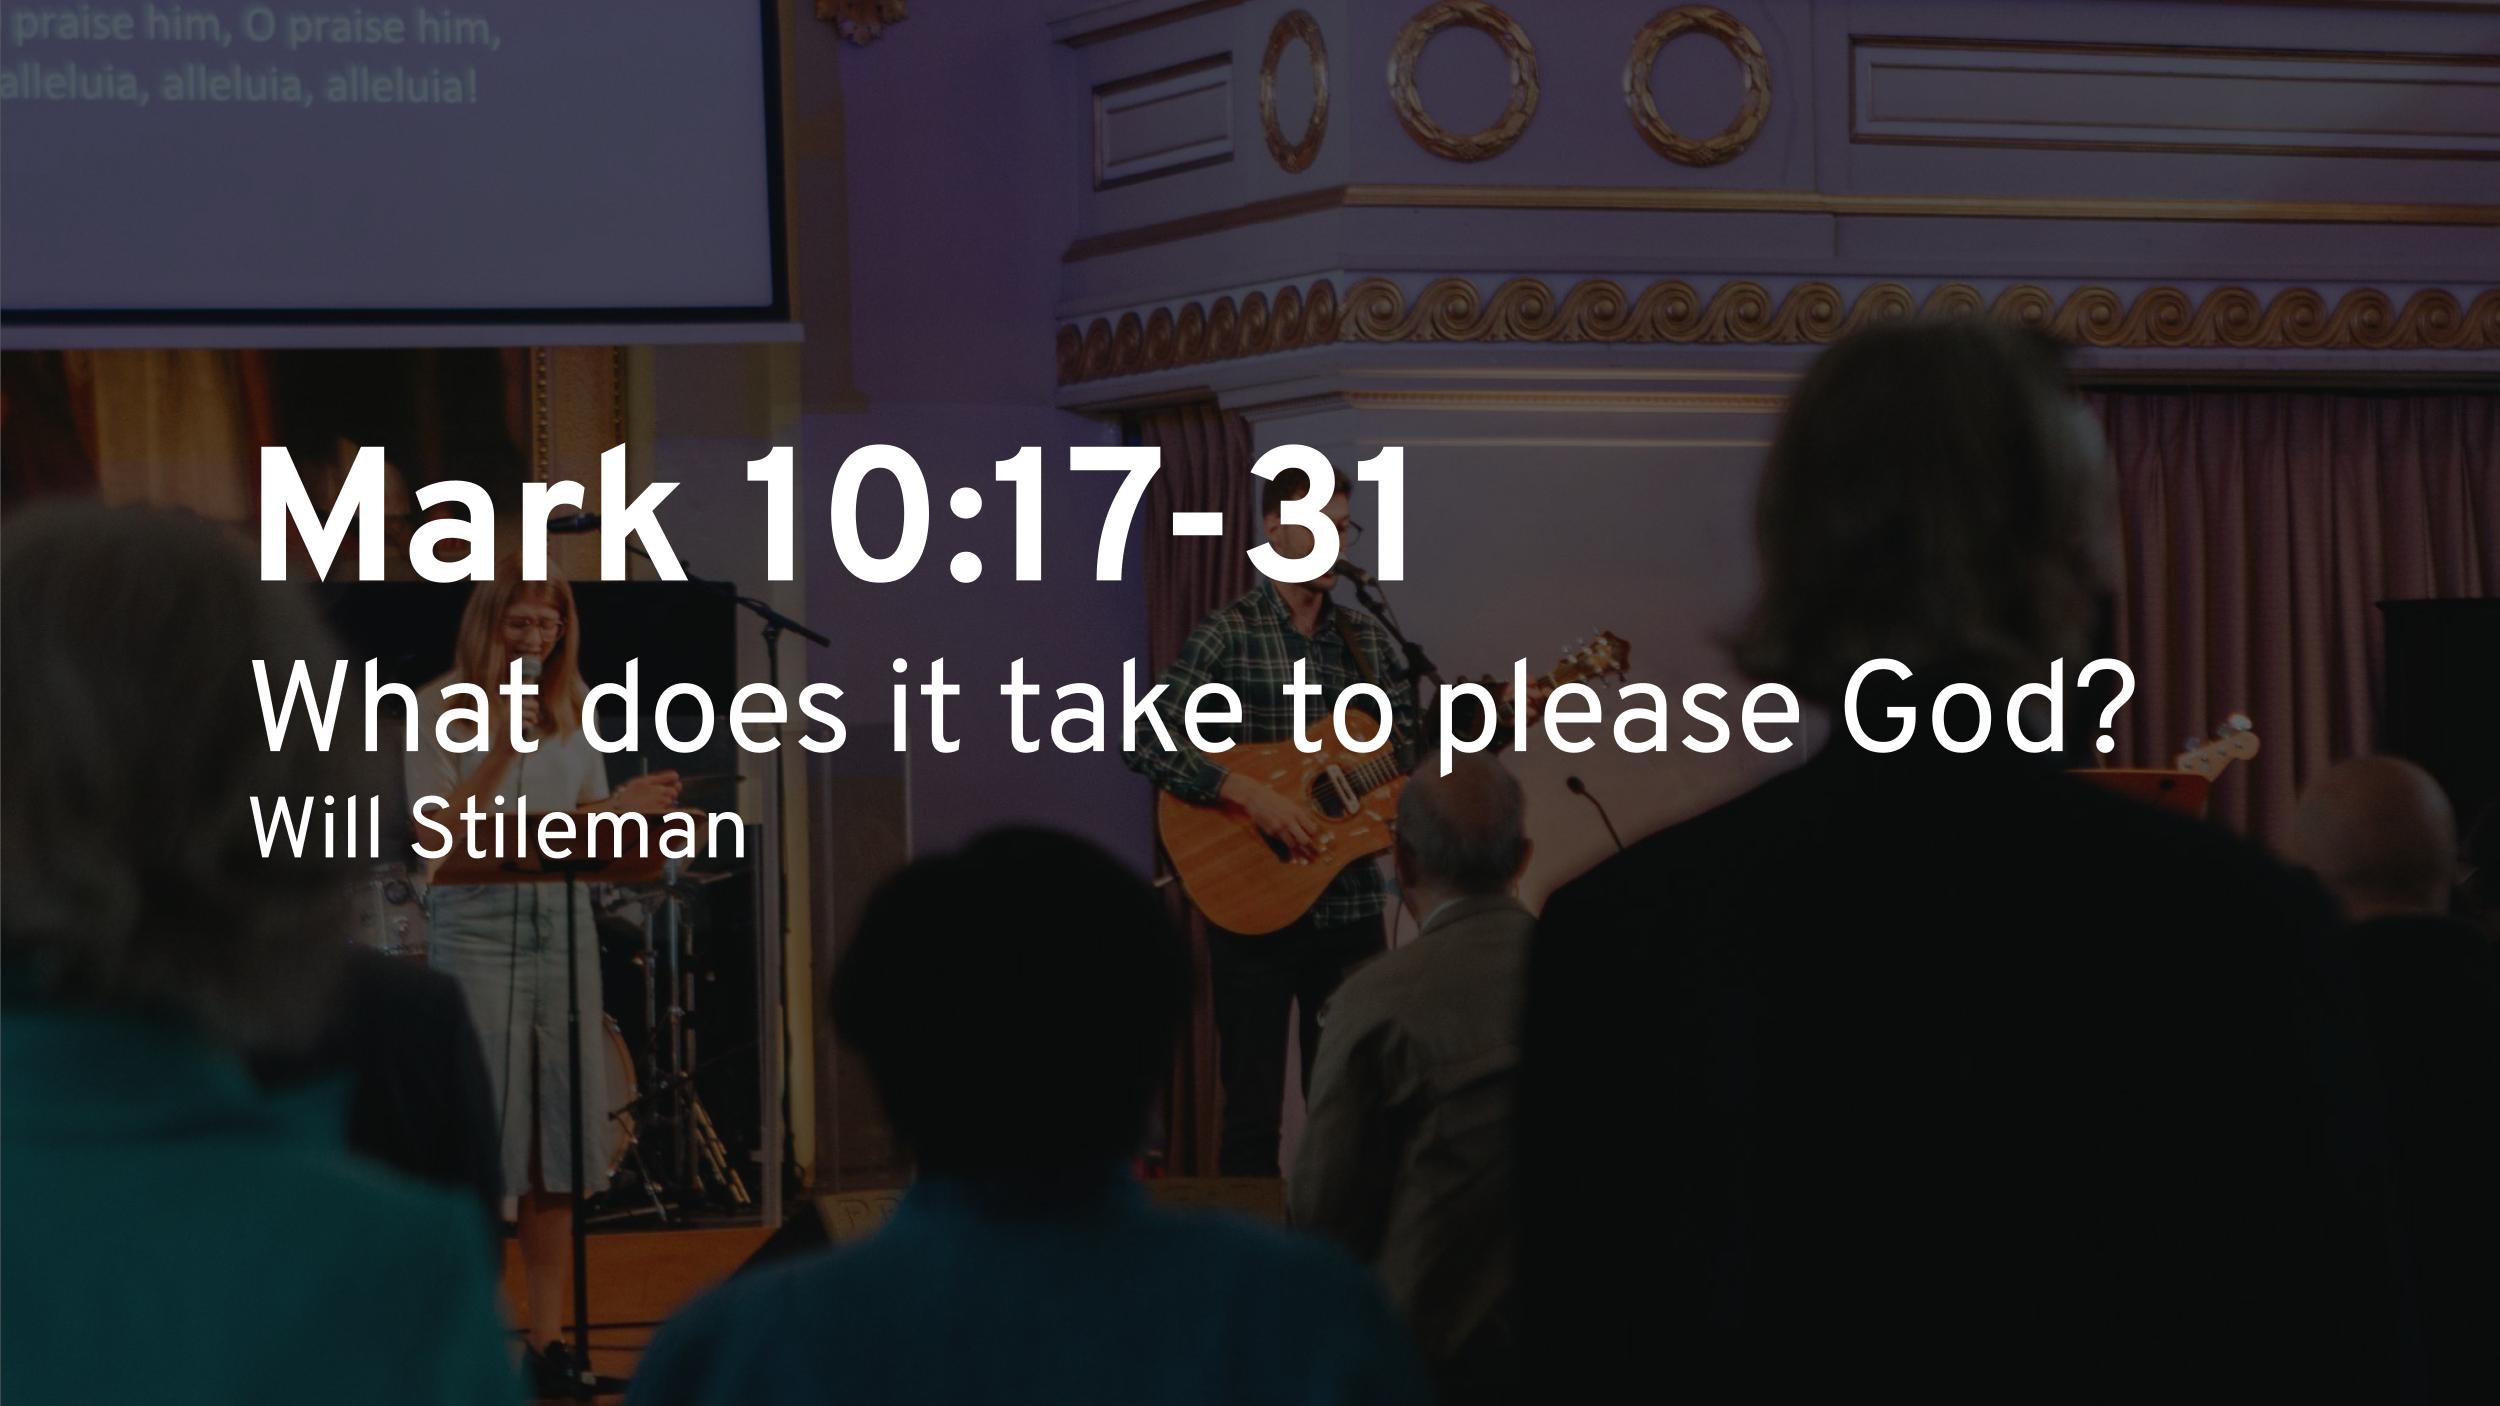 What does it take to please God?